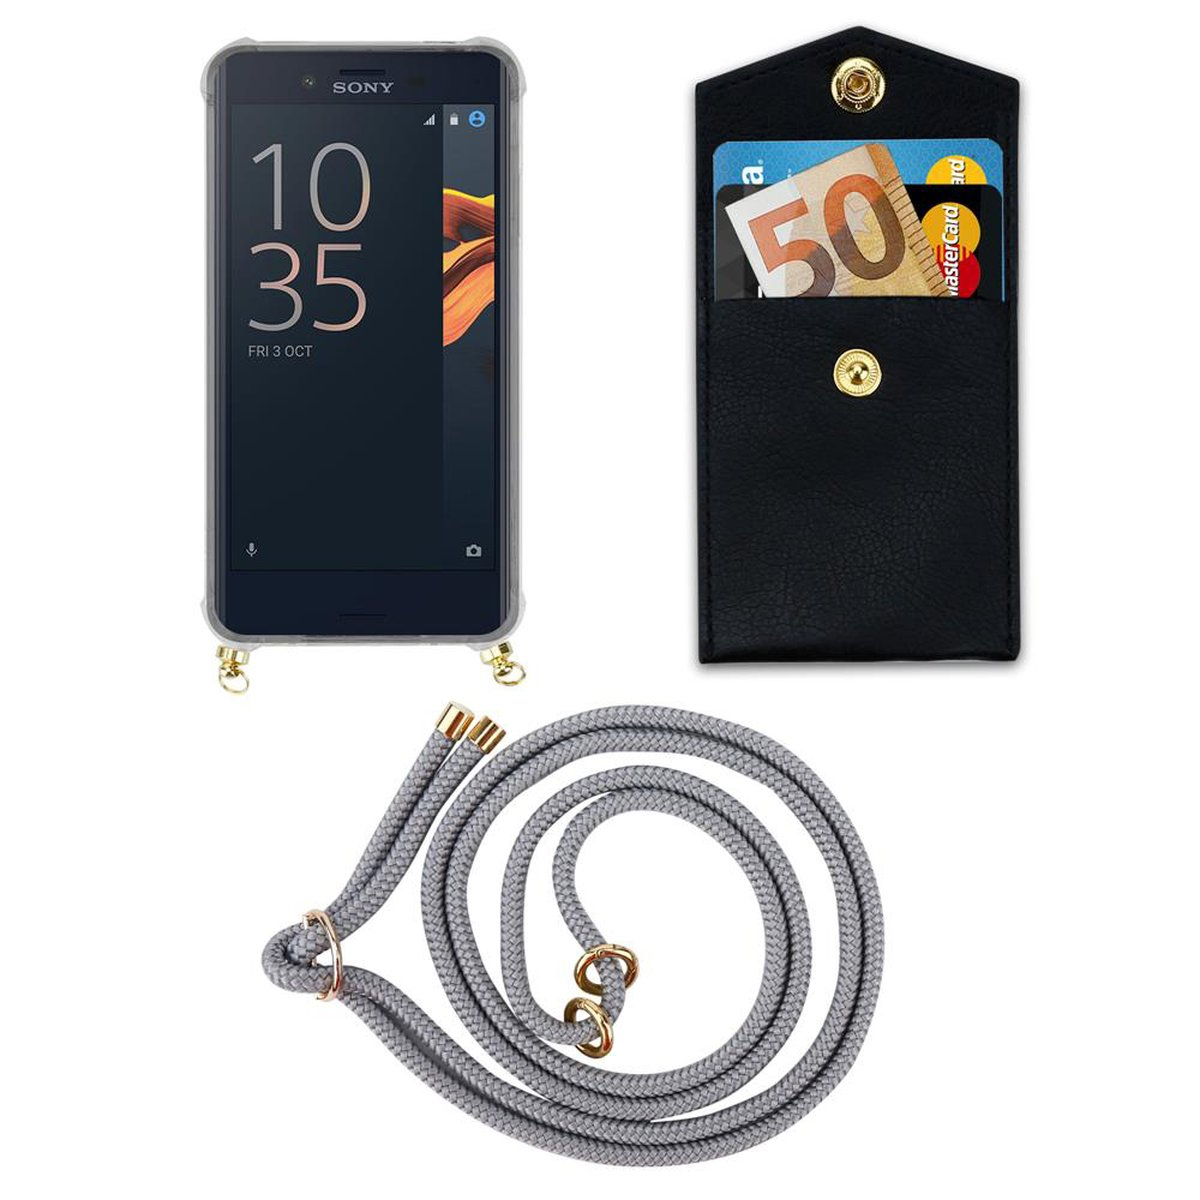 Backcover, Xperia abnehmbarer Handy X und SILBER Kordel mit Ringen, CADORABO Gold Kette Sony, GRAU COMPACT, Band Hülle,